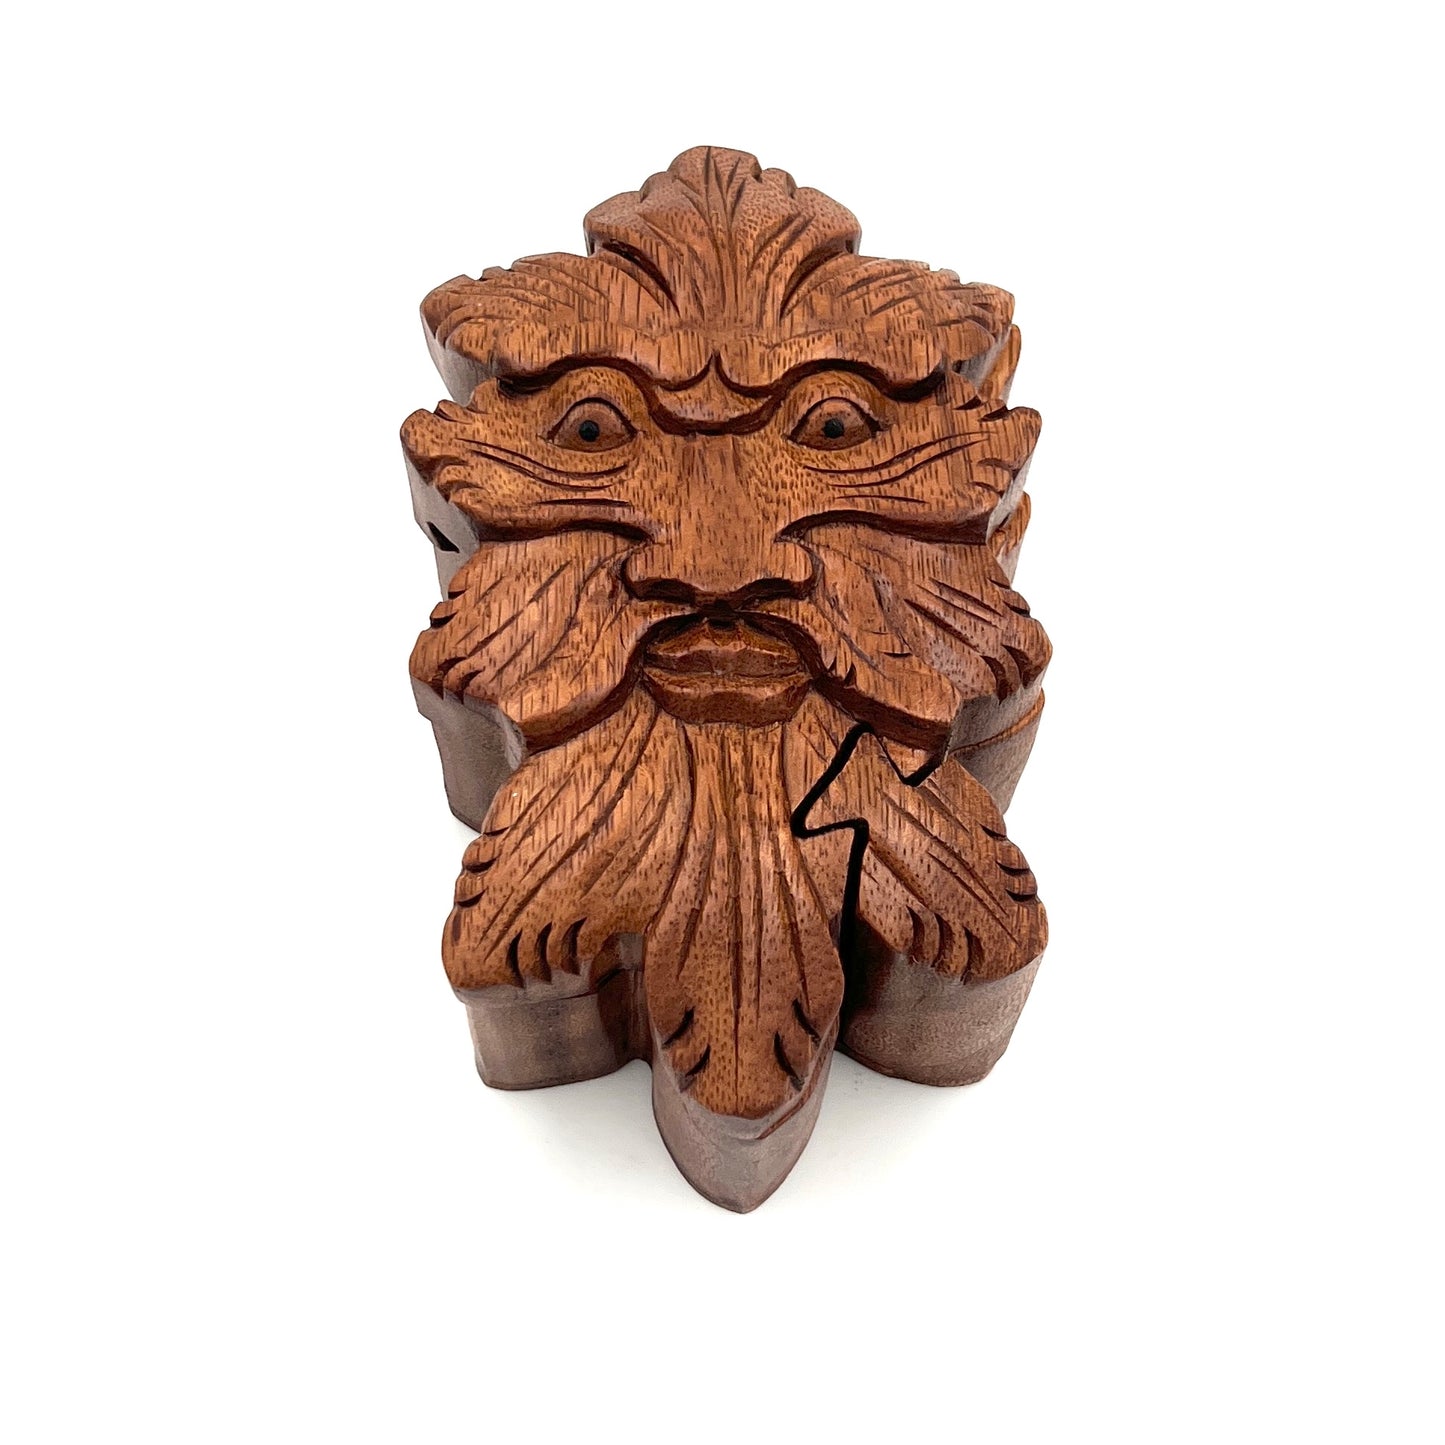 Green Man Puzzle Boxes